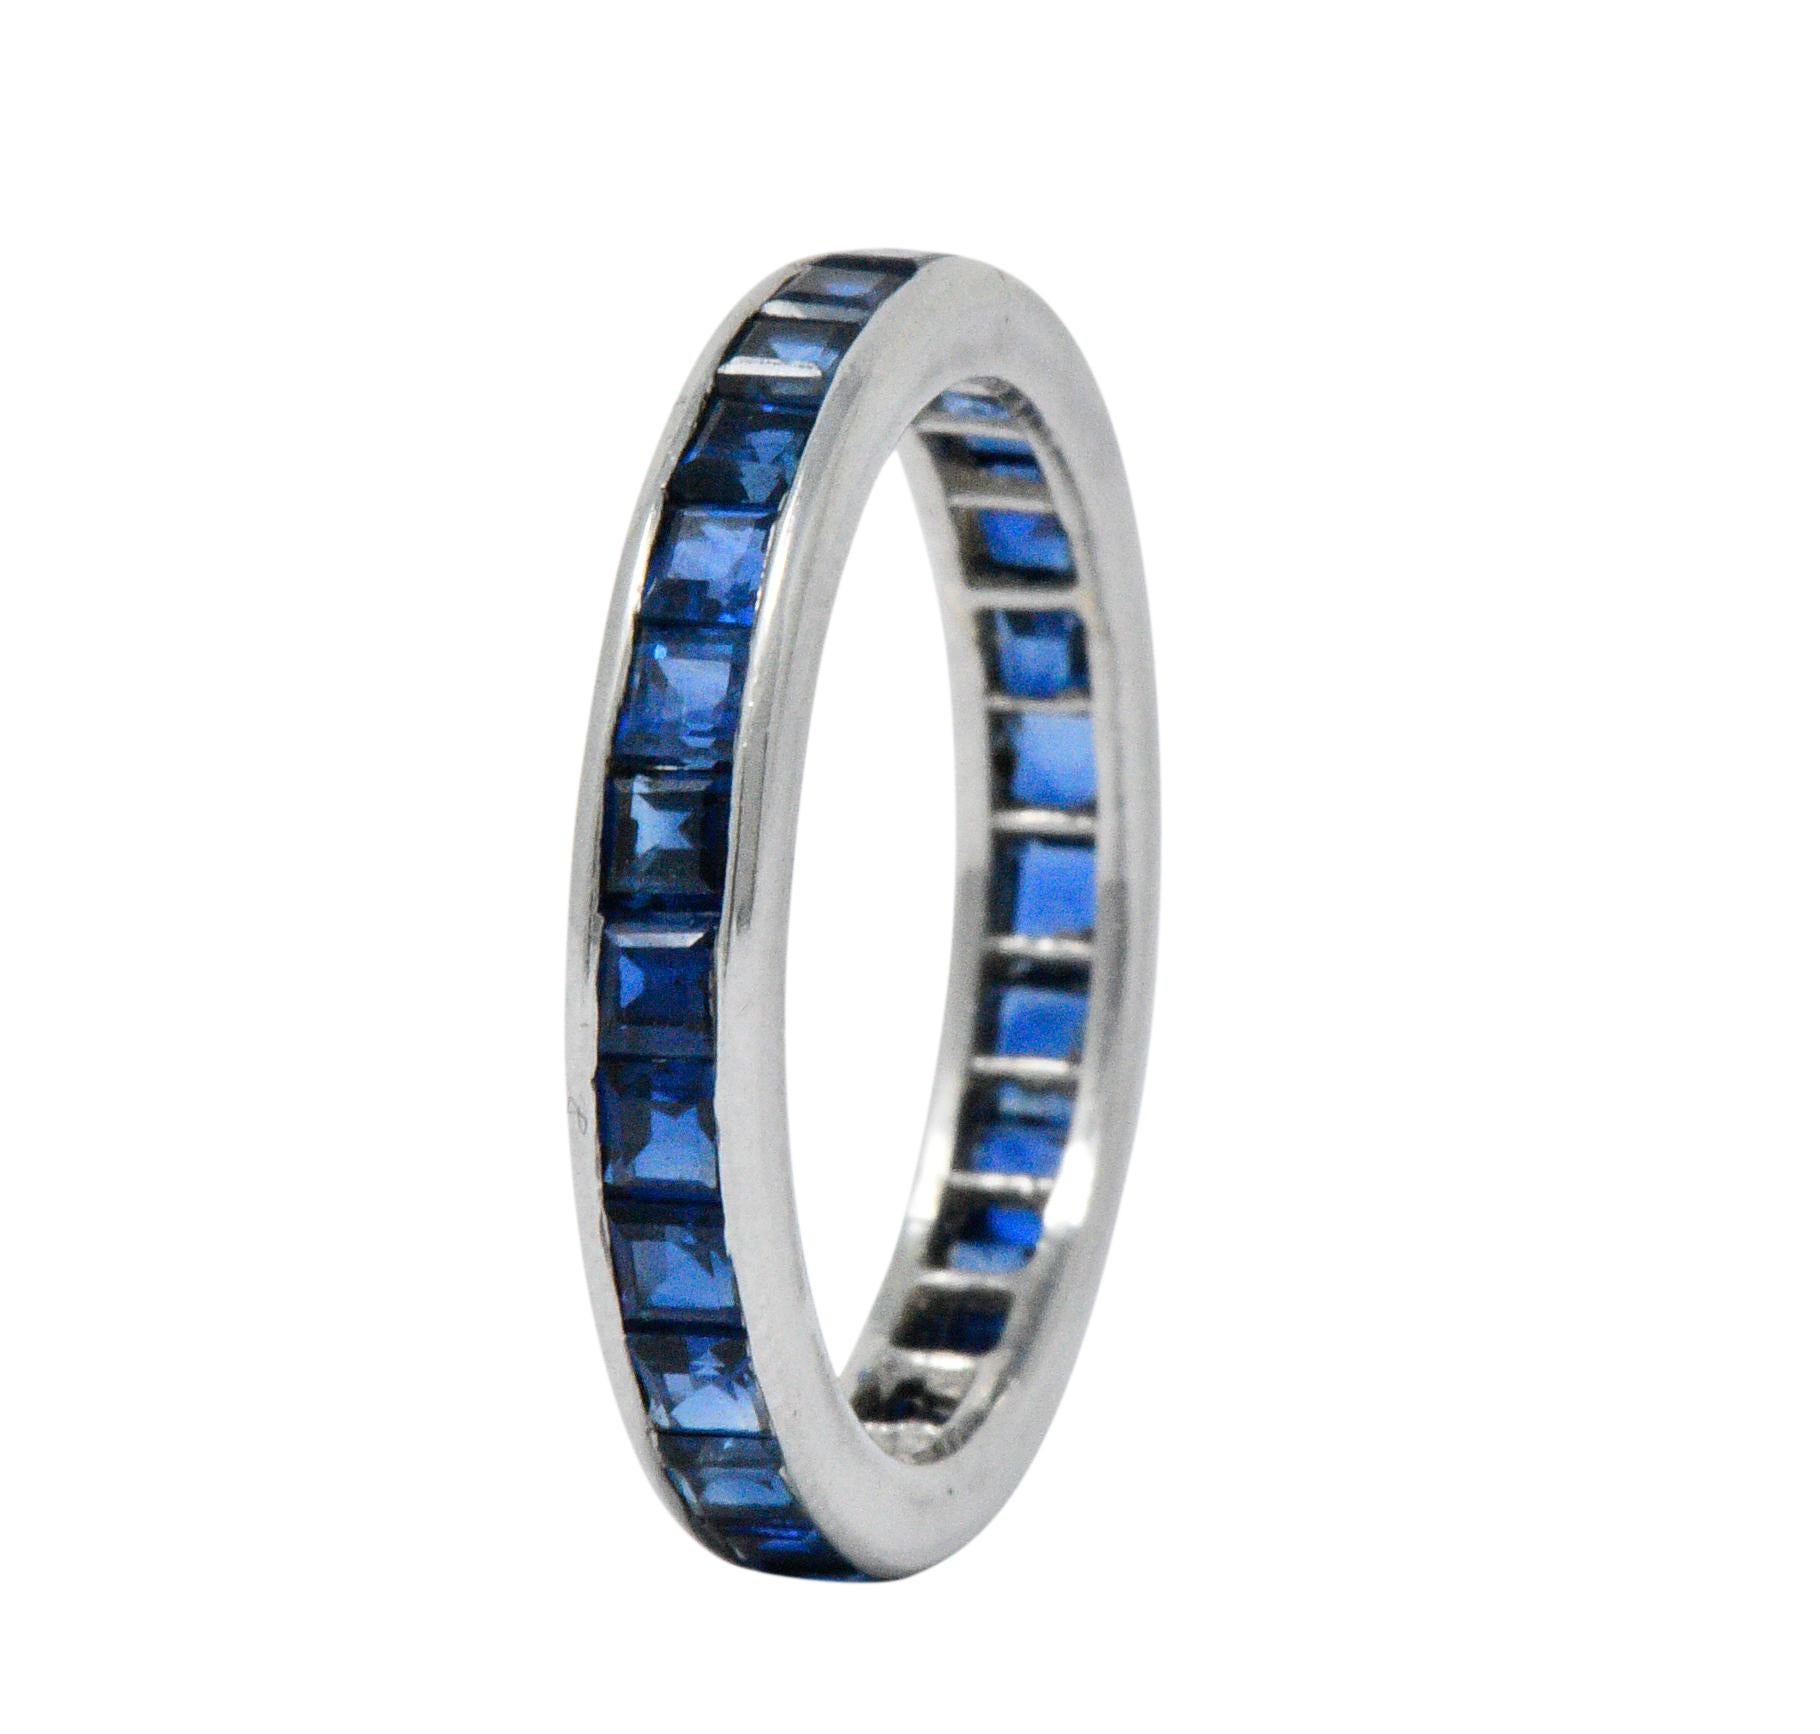 Designed as eternity band with royal blue, square calibré cut sapphires 

Channel set, weighing approximately 2.70 carats total

Stamped PT 950 with maker's mark for Oscar Heyman Brothers, also numbered

Ring Size: 6 & not sizable

Top Measures: 3